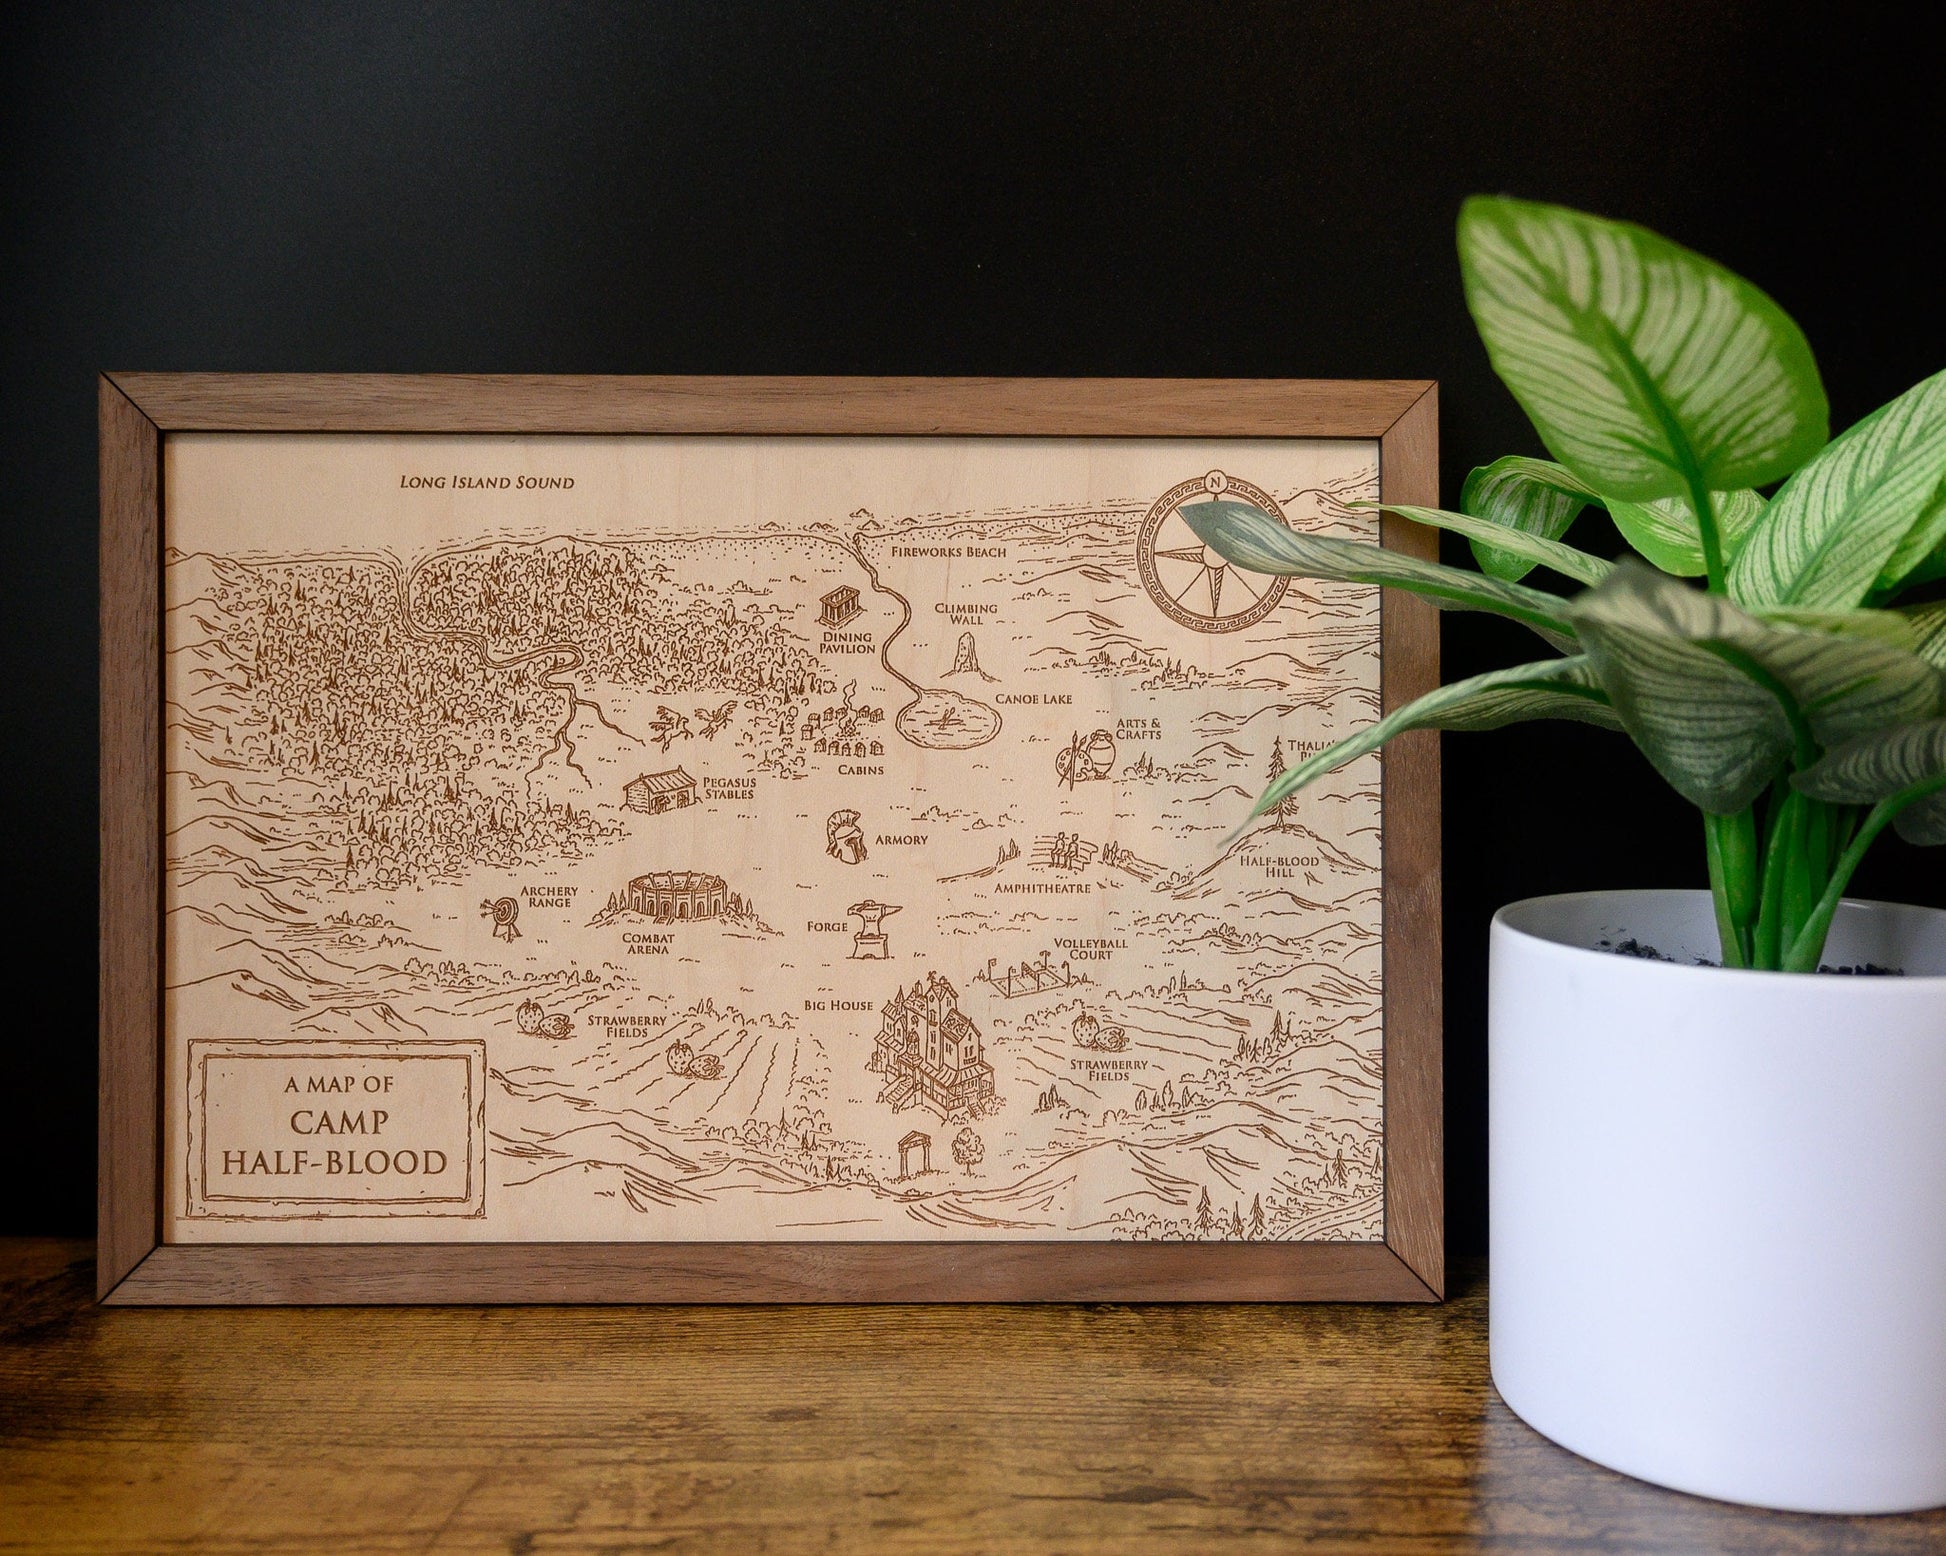 Percy Jackson Map, Wood Engraved Camp Half-Blood Map